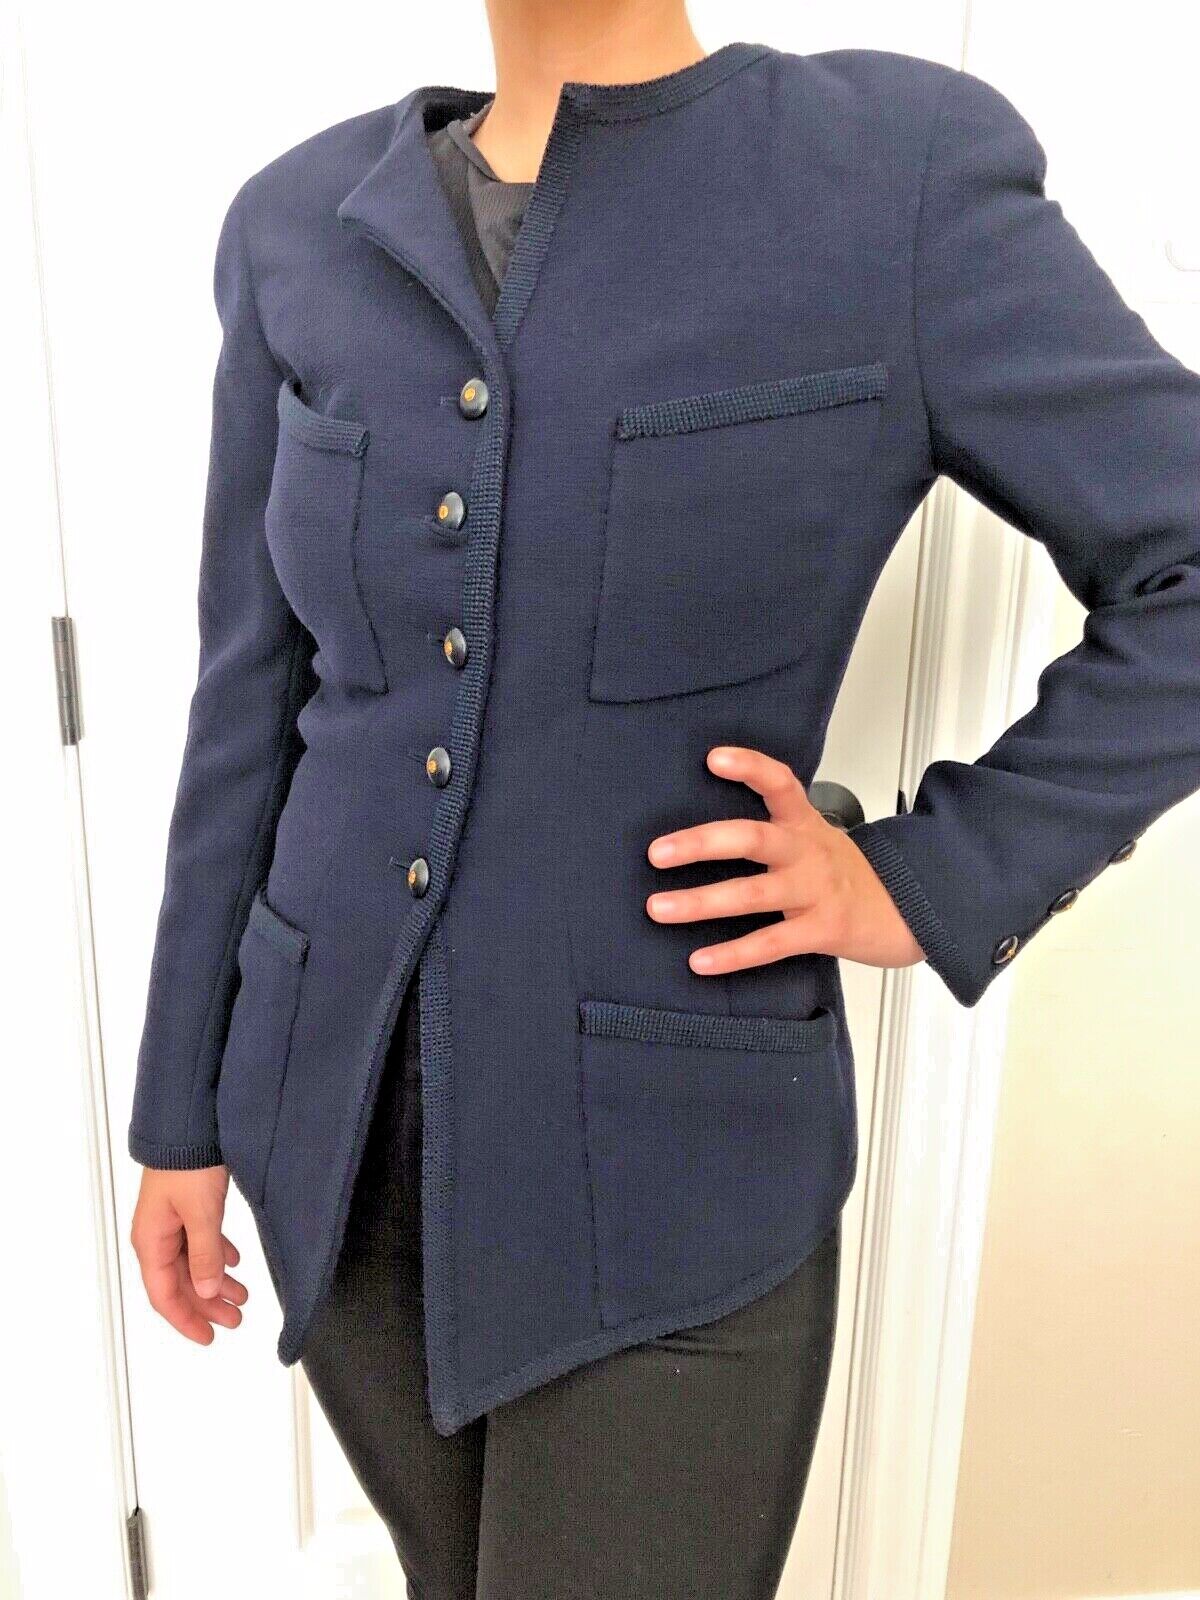 CHANEL Boutique Vintage Navy Wool Jacket w/ gold chain lining